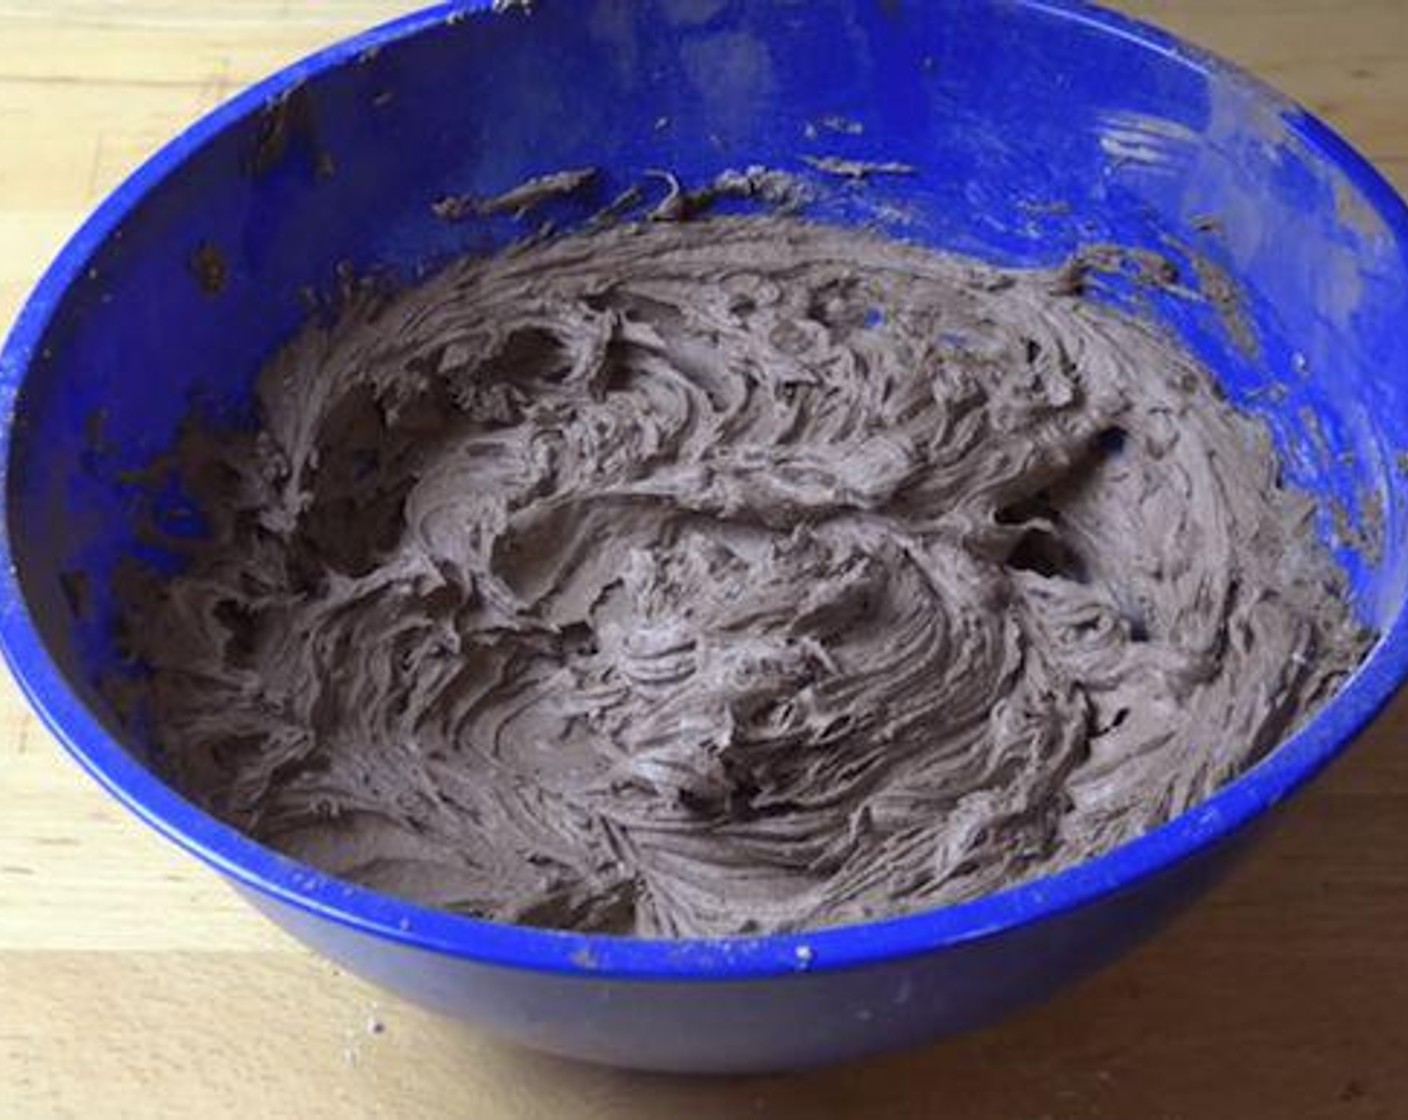 step 2 In a mixing bowl sift Powdered Confectioners Sugar (3 cups), Unsweetened Cocoa Powder (1/2 cup), Vanilla Extract (1 tsp), Butter (1 cup) and Milk (2 Tbsp). Using an electric beater mix until smooth.